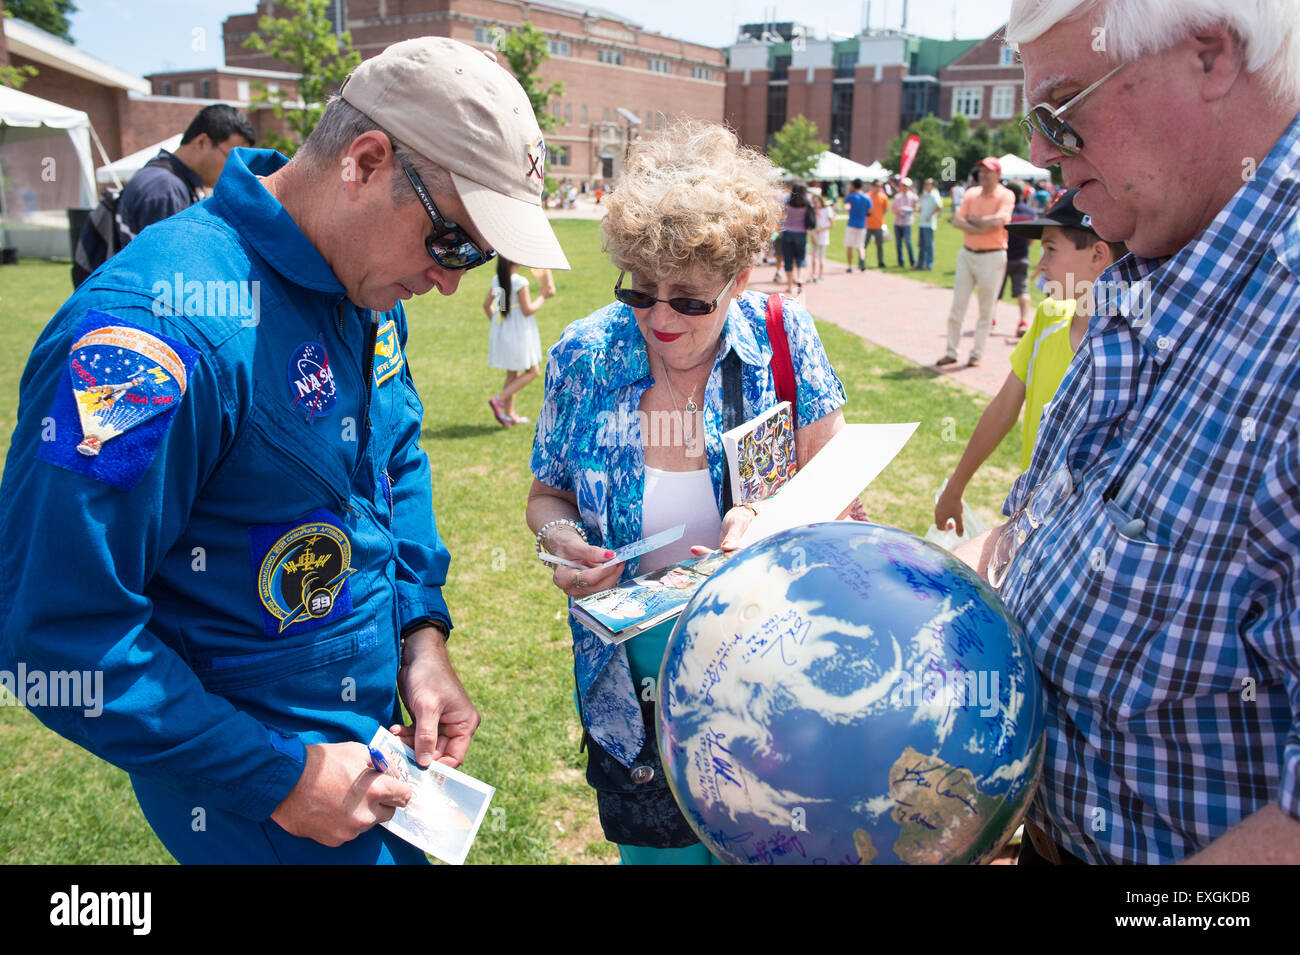 NASA astronaut Steve Swanson, left, signs autographs during the TouchTomorrow Festival, held in conjunction with the 2015 Sample Return Robot Challenge, Saturday, June 13, 2015 at the Worcester Polytechnic Institute (WPI) in Worcester, Mass.  Sixteen teams competed for a $1.5 million NASA prize purse. Teams will be required to demonstrate autonomous robots that can locate and collect samples from a wide and varied terrain, operating without human control. The objective of this NASA-WPI Centennial Challenge is to encourage innovations in autonomous navigation and robotics technologies. Innovati Stock Photo